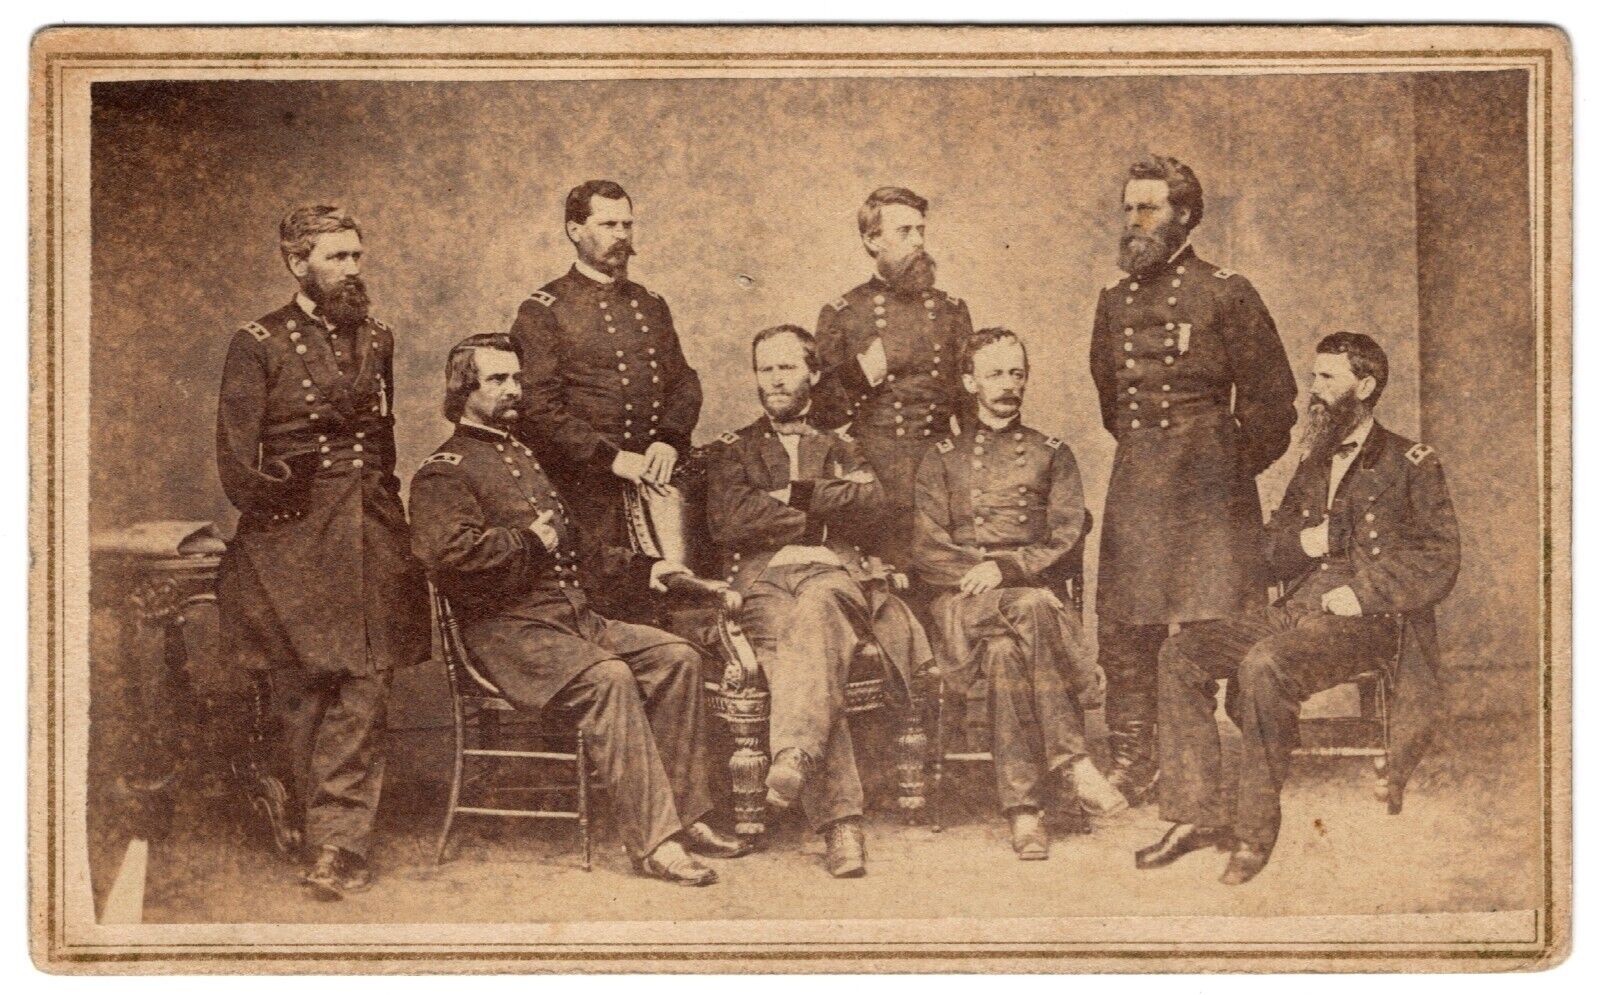 CDV Photograph of William T Sherman & His Generals - Known for March to the Sea